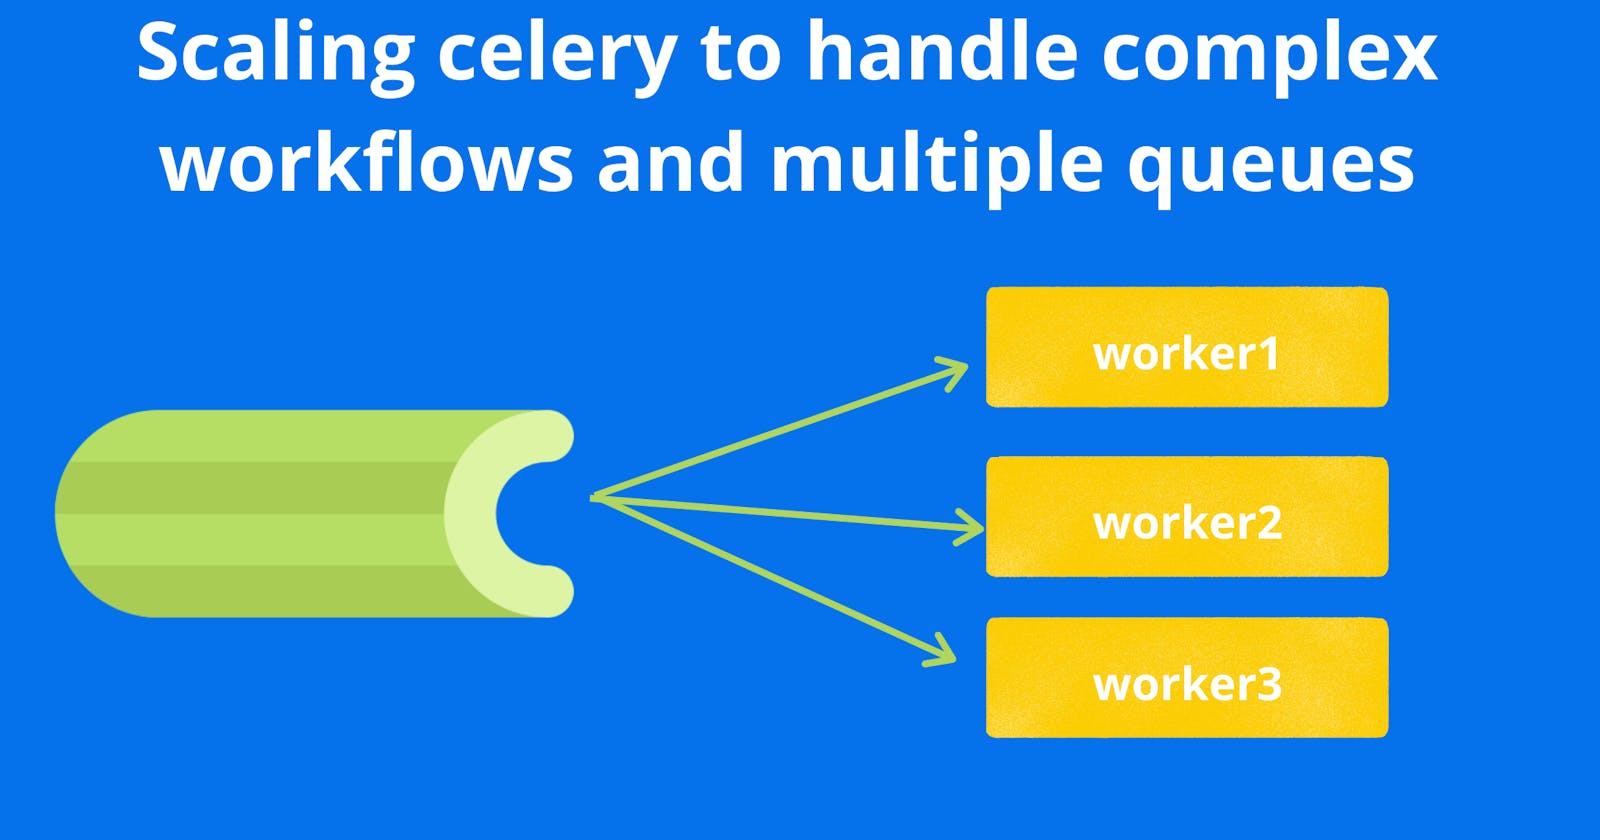 Scaling Celery to handle workflows and multiple queues